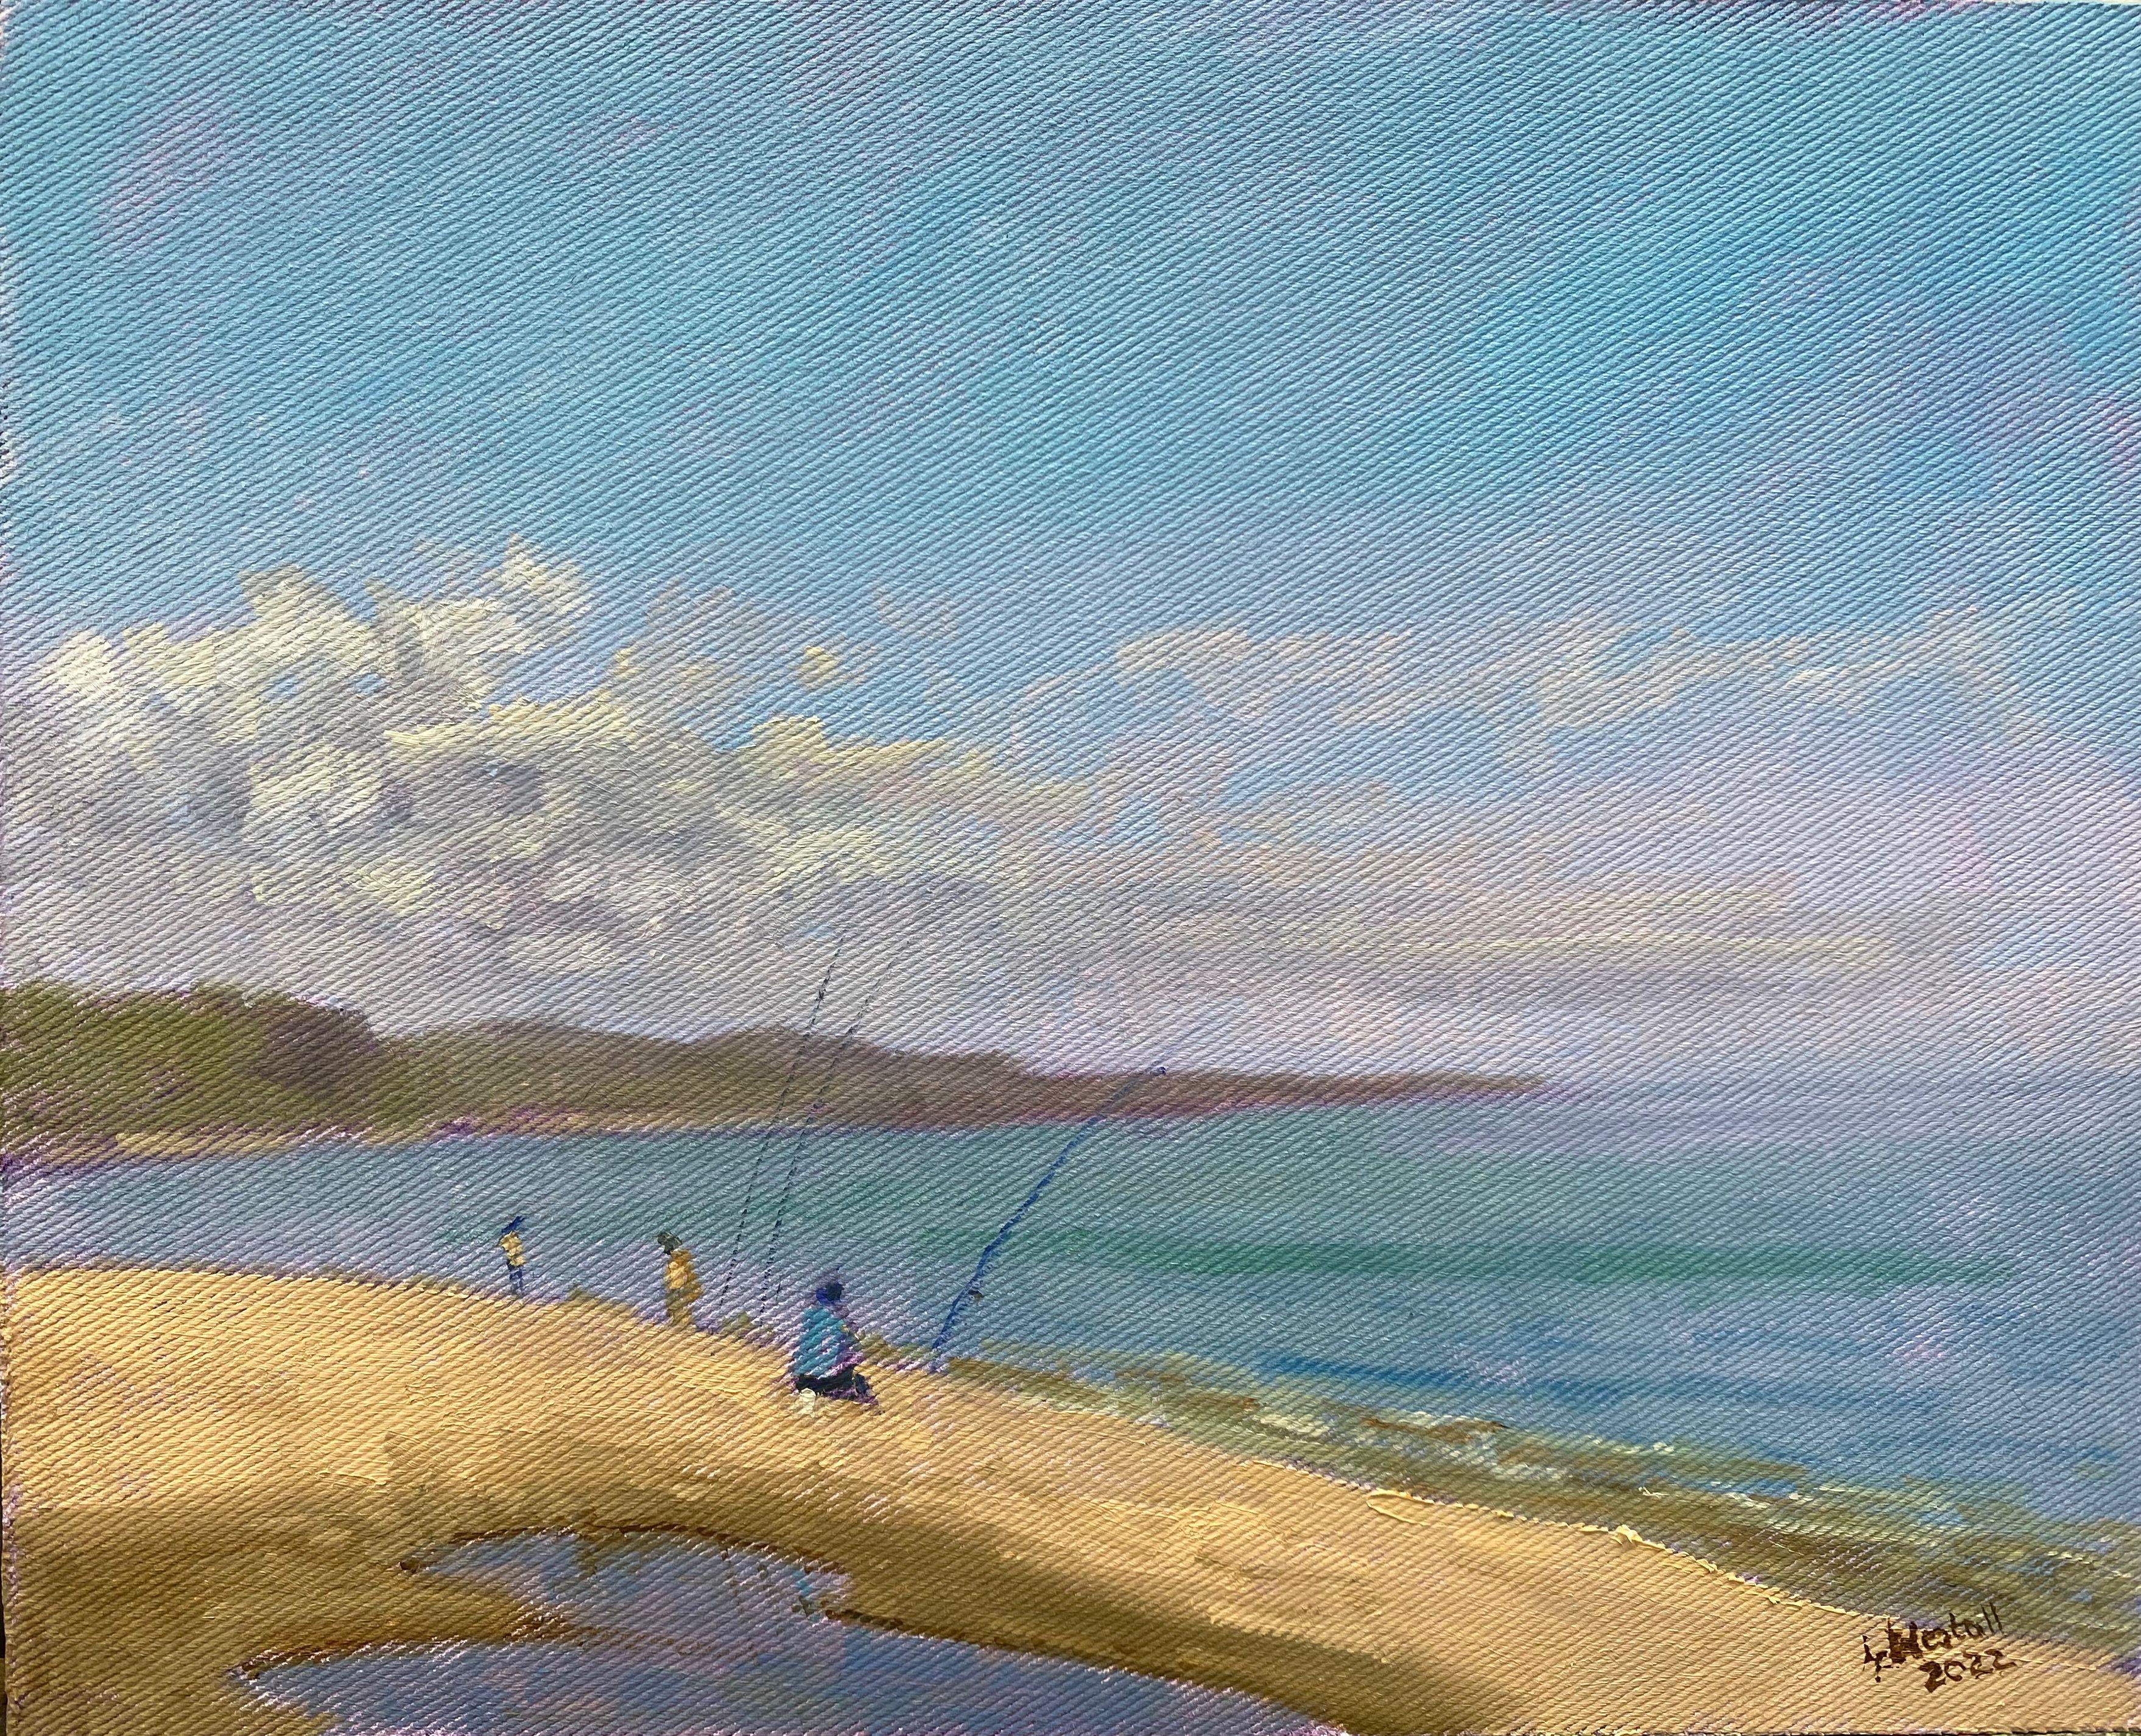 Plein air, Poland, 2022.  In the near where the Czerwona flows into the Baltic Sea is a very popular fishing spot. Anglers have been targeting garfish and from what I've seen they have been quite successful.  Plein air painting tour, Poland.  Oil on